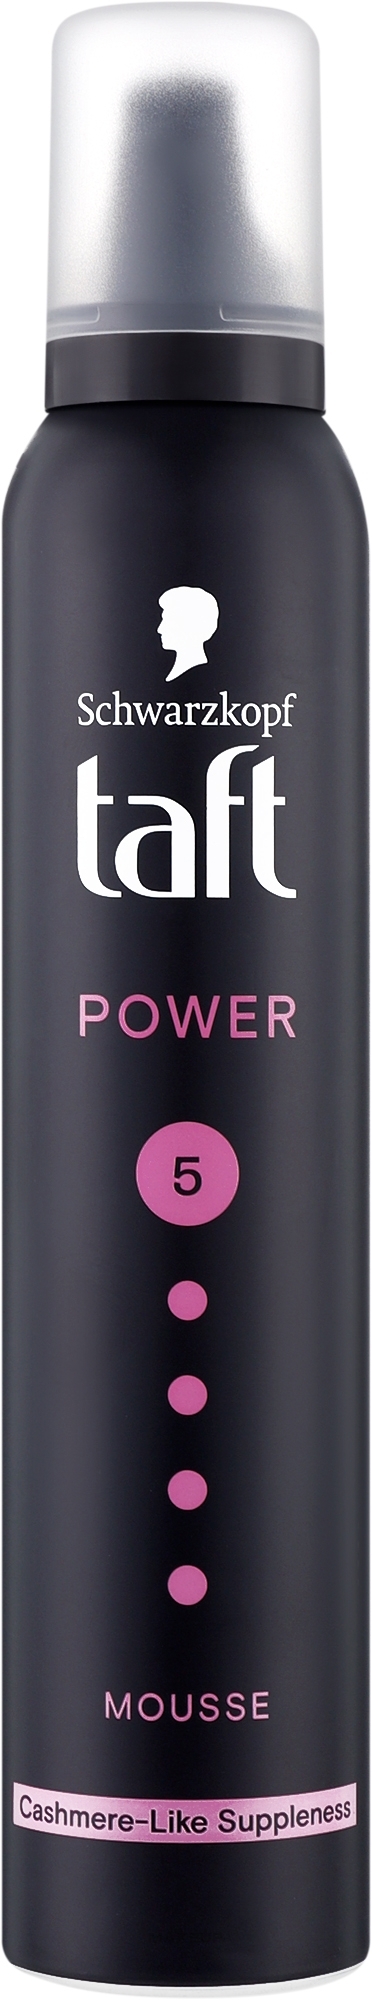 Mega Hold Styling Hair Mousse "Cashmere Touch" - Schwarzkopf Taft Power Cashmere Touch Mousse  — photo 200 ml